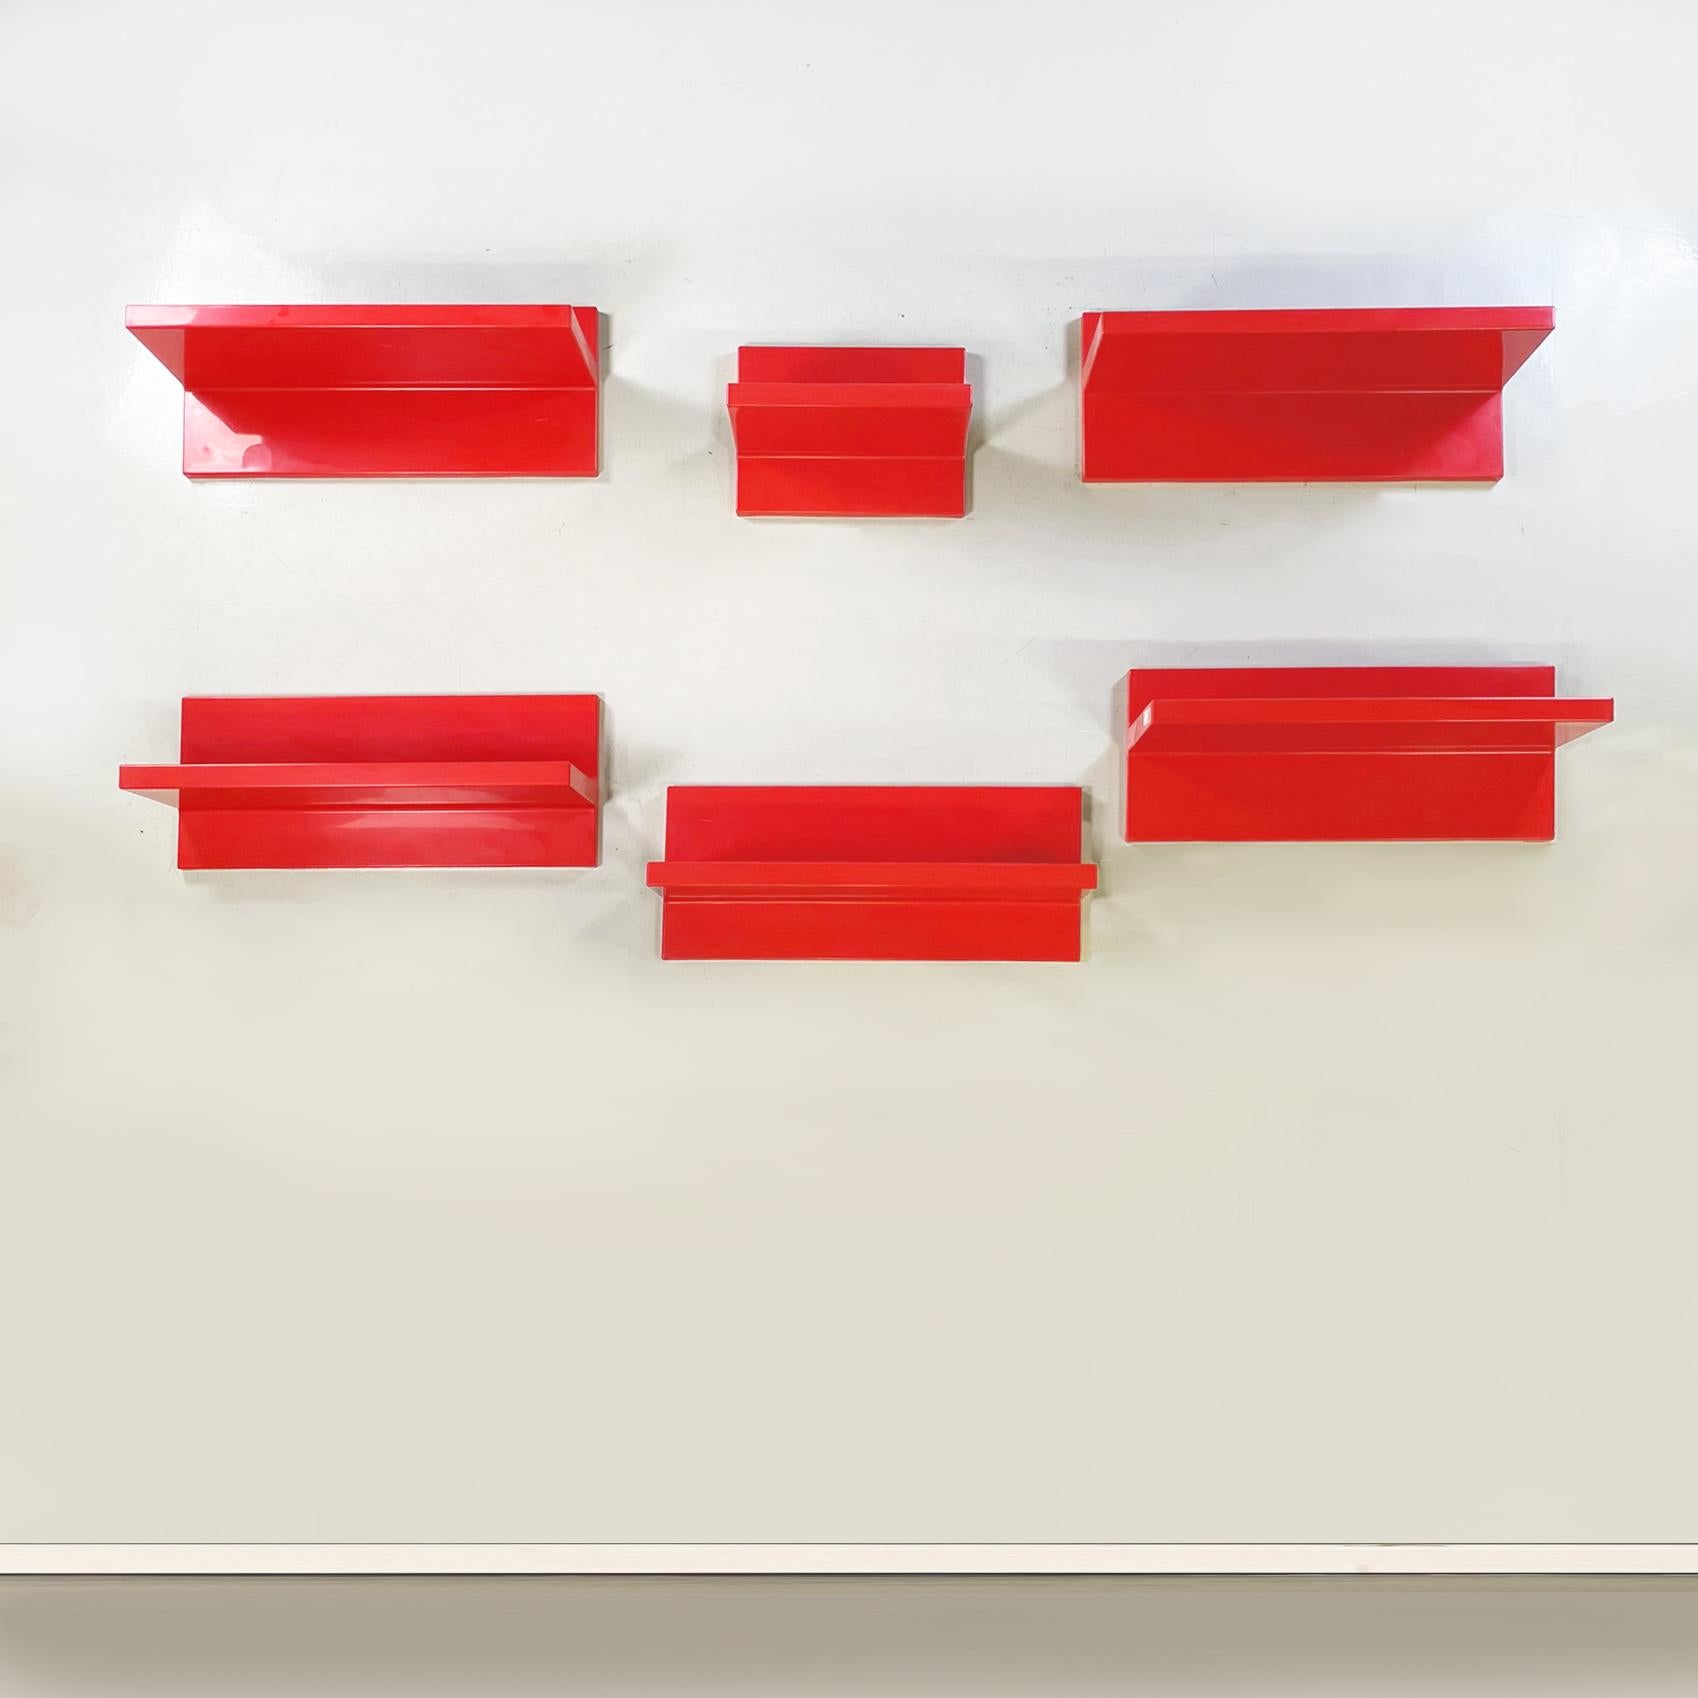 Italian modern Red plastic shelves by Marcello Siard for Kartell, 1970s
Set of fantastic six shelves with asymmetric profile in bright red plastic. There are two types of measures: one small and five large. They can be mounted in both